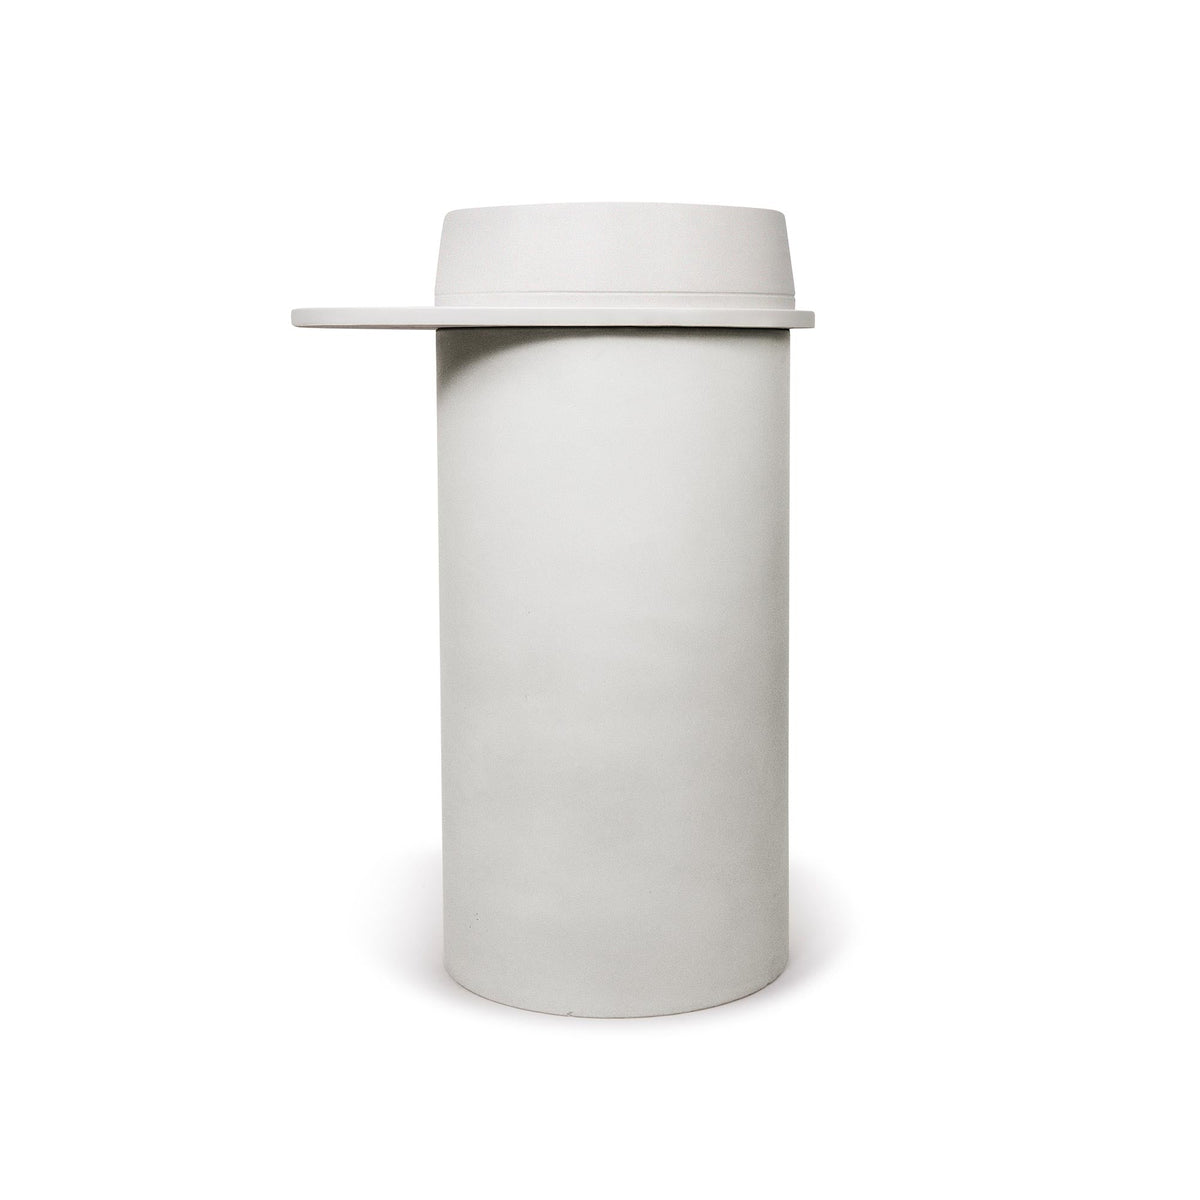 Cylinder with Tray - Funl Basin (Blush Pink,Clay)